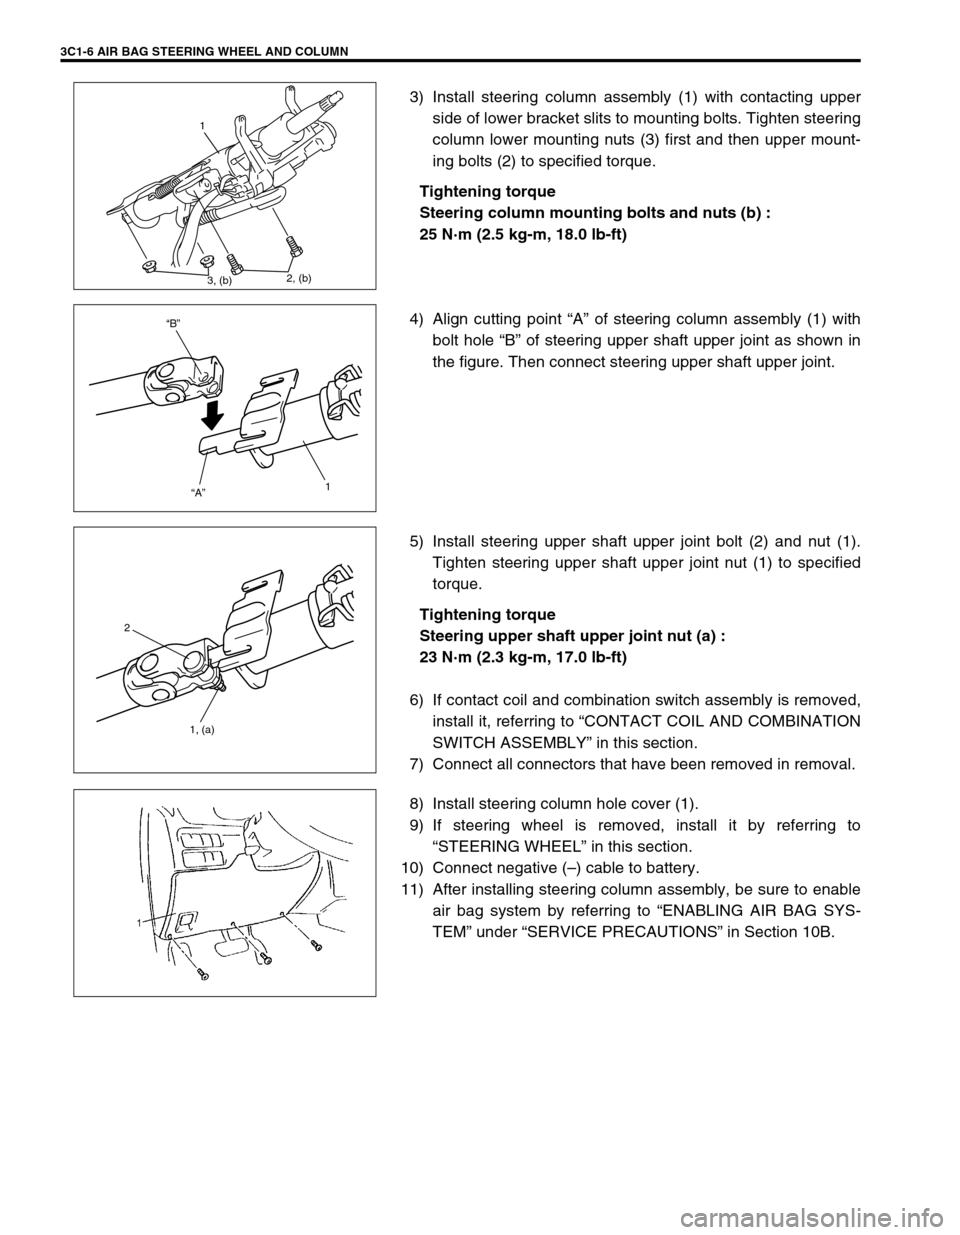 SUZUKI GRAND VITARA 2001 2.G Manual Online 3C1-6 AIR BAG STEERING WHEEL AND COLUMN
3) Install steering column assembly (1) with contacting upper
side of lower bracket slits to mounting bolts. Tighten steering
column lower mounting nuts (3) fir